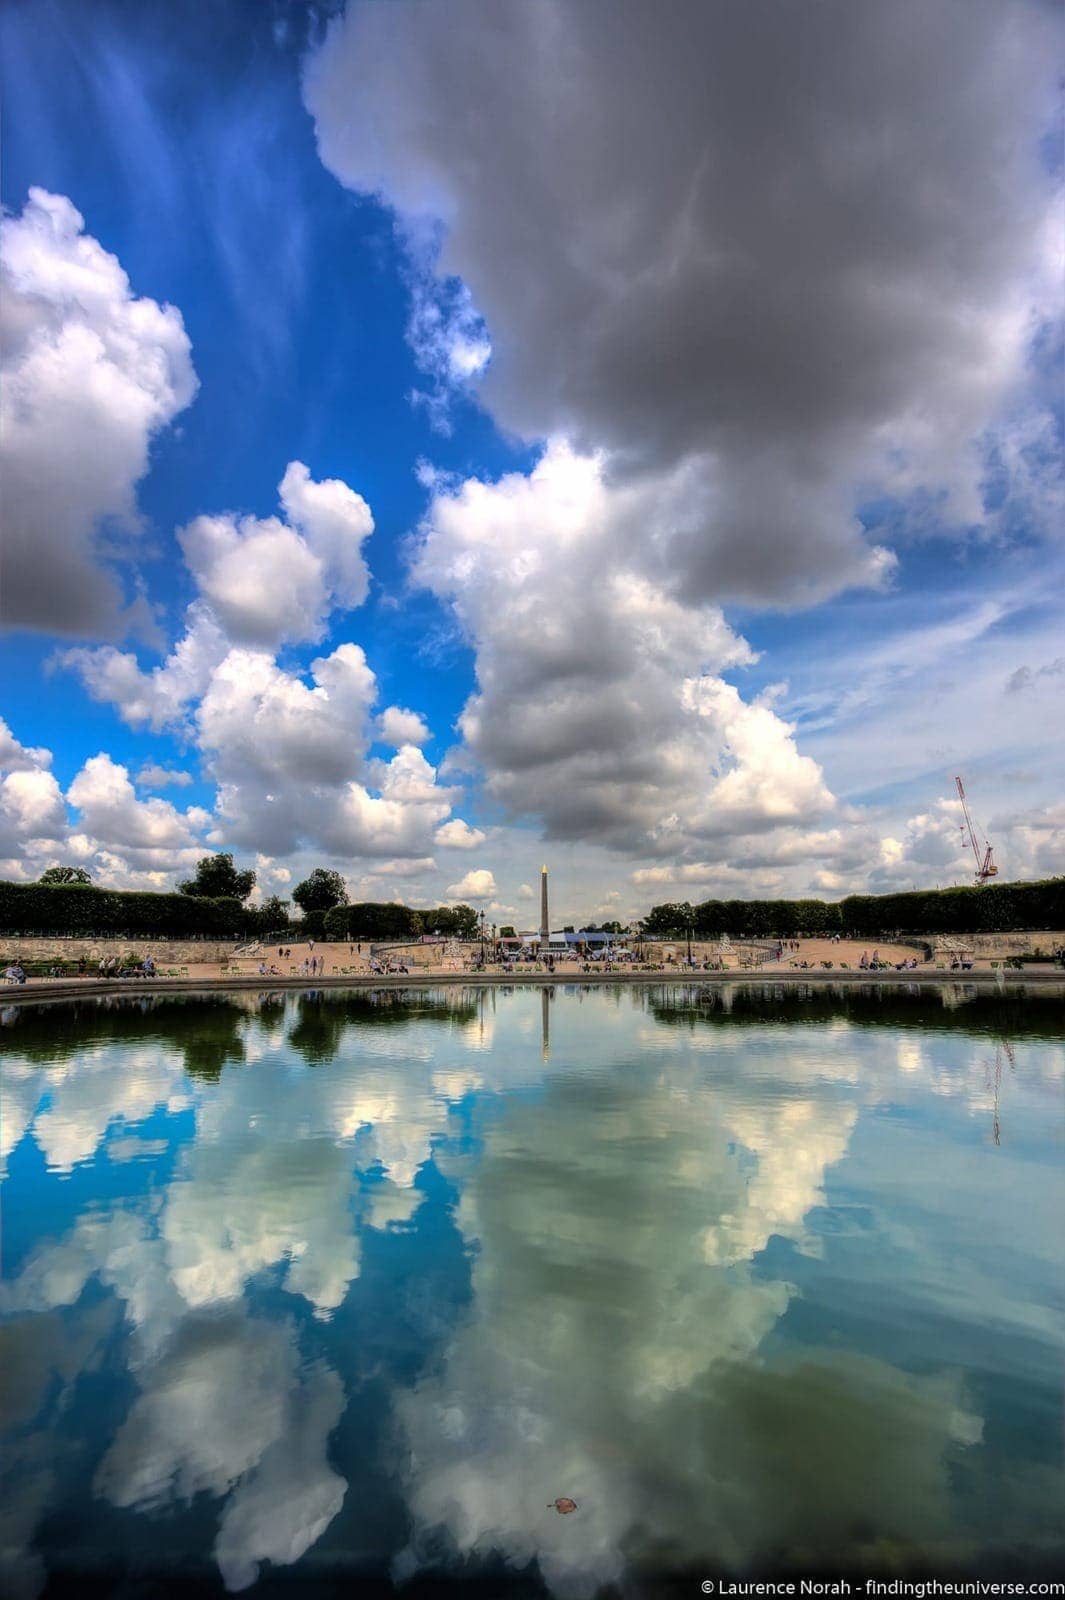 Paris place concorde reflected in tuileries pond - scaled